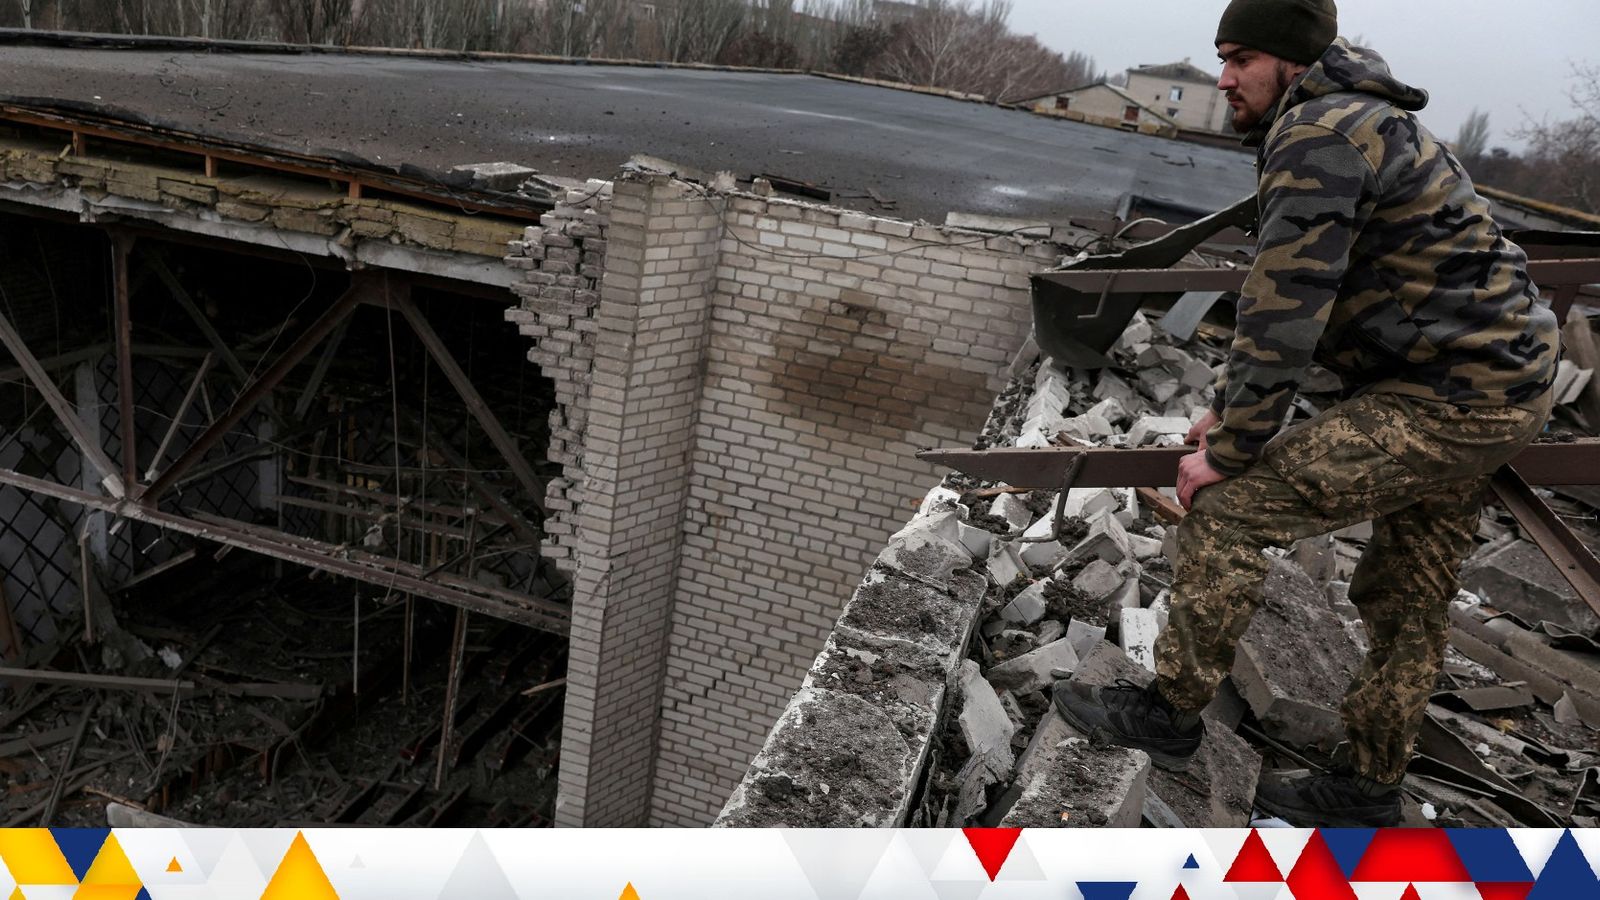 ‘Children’s torture chamber’ uncovered in Kherson; Russian army forms ‘creative brigade’ to support soldiers | War latest